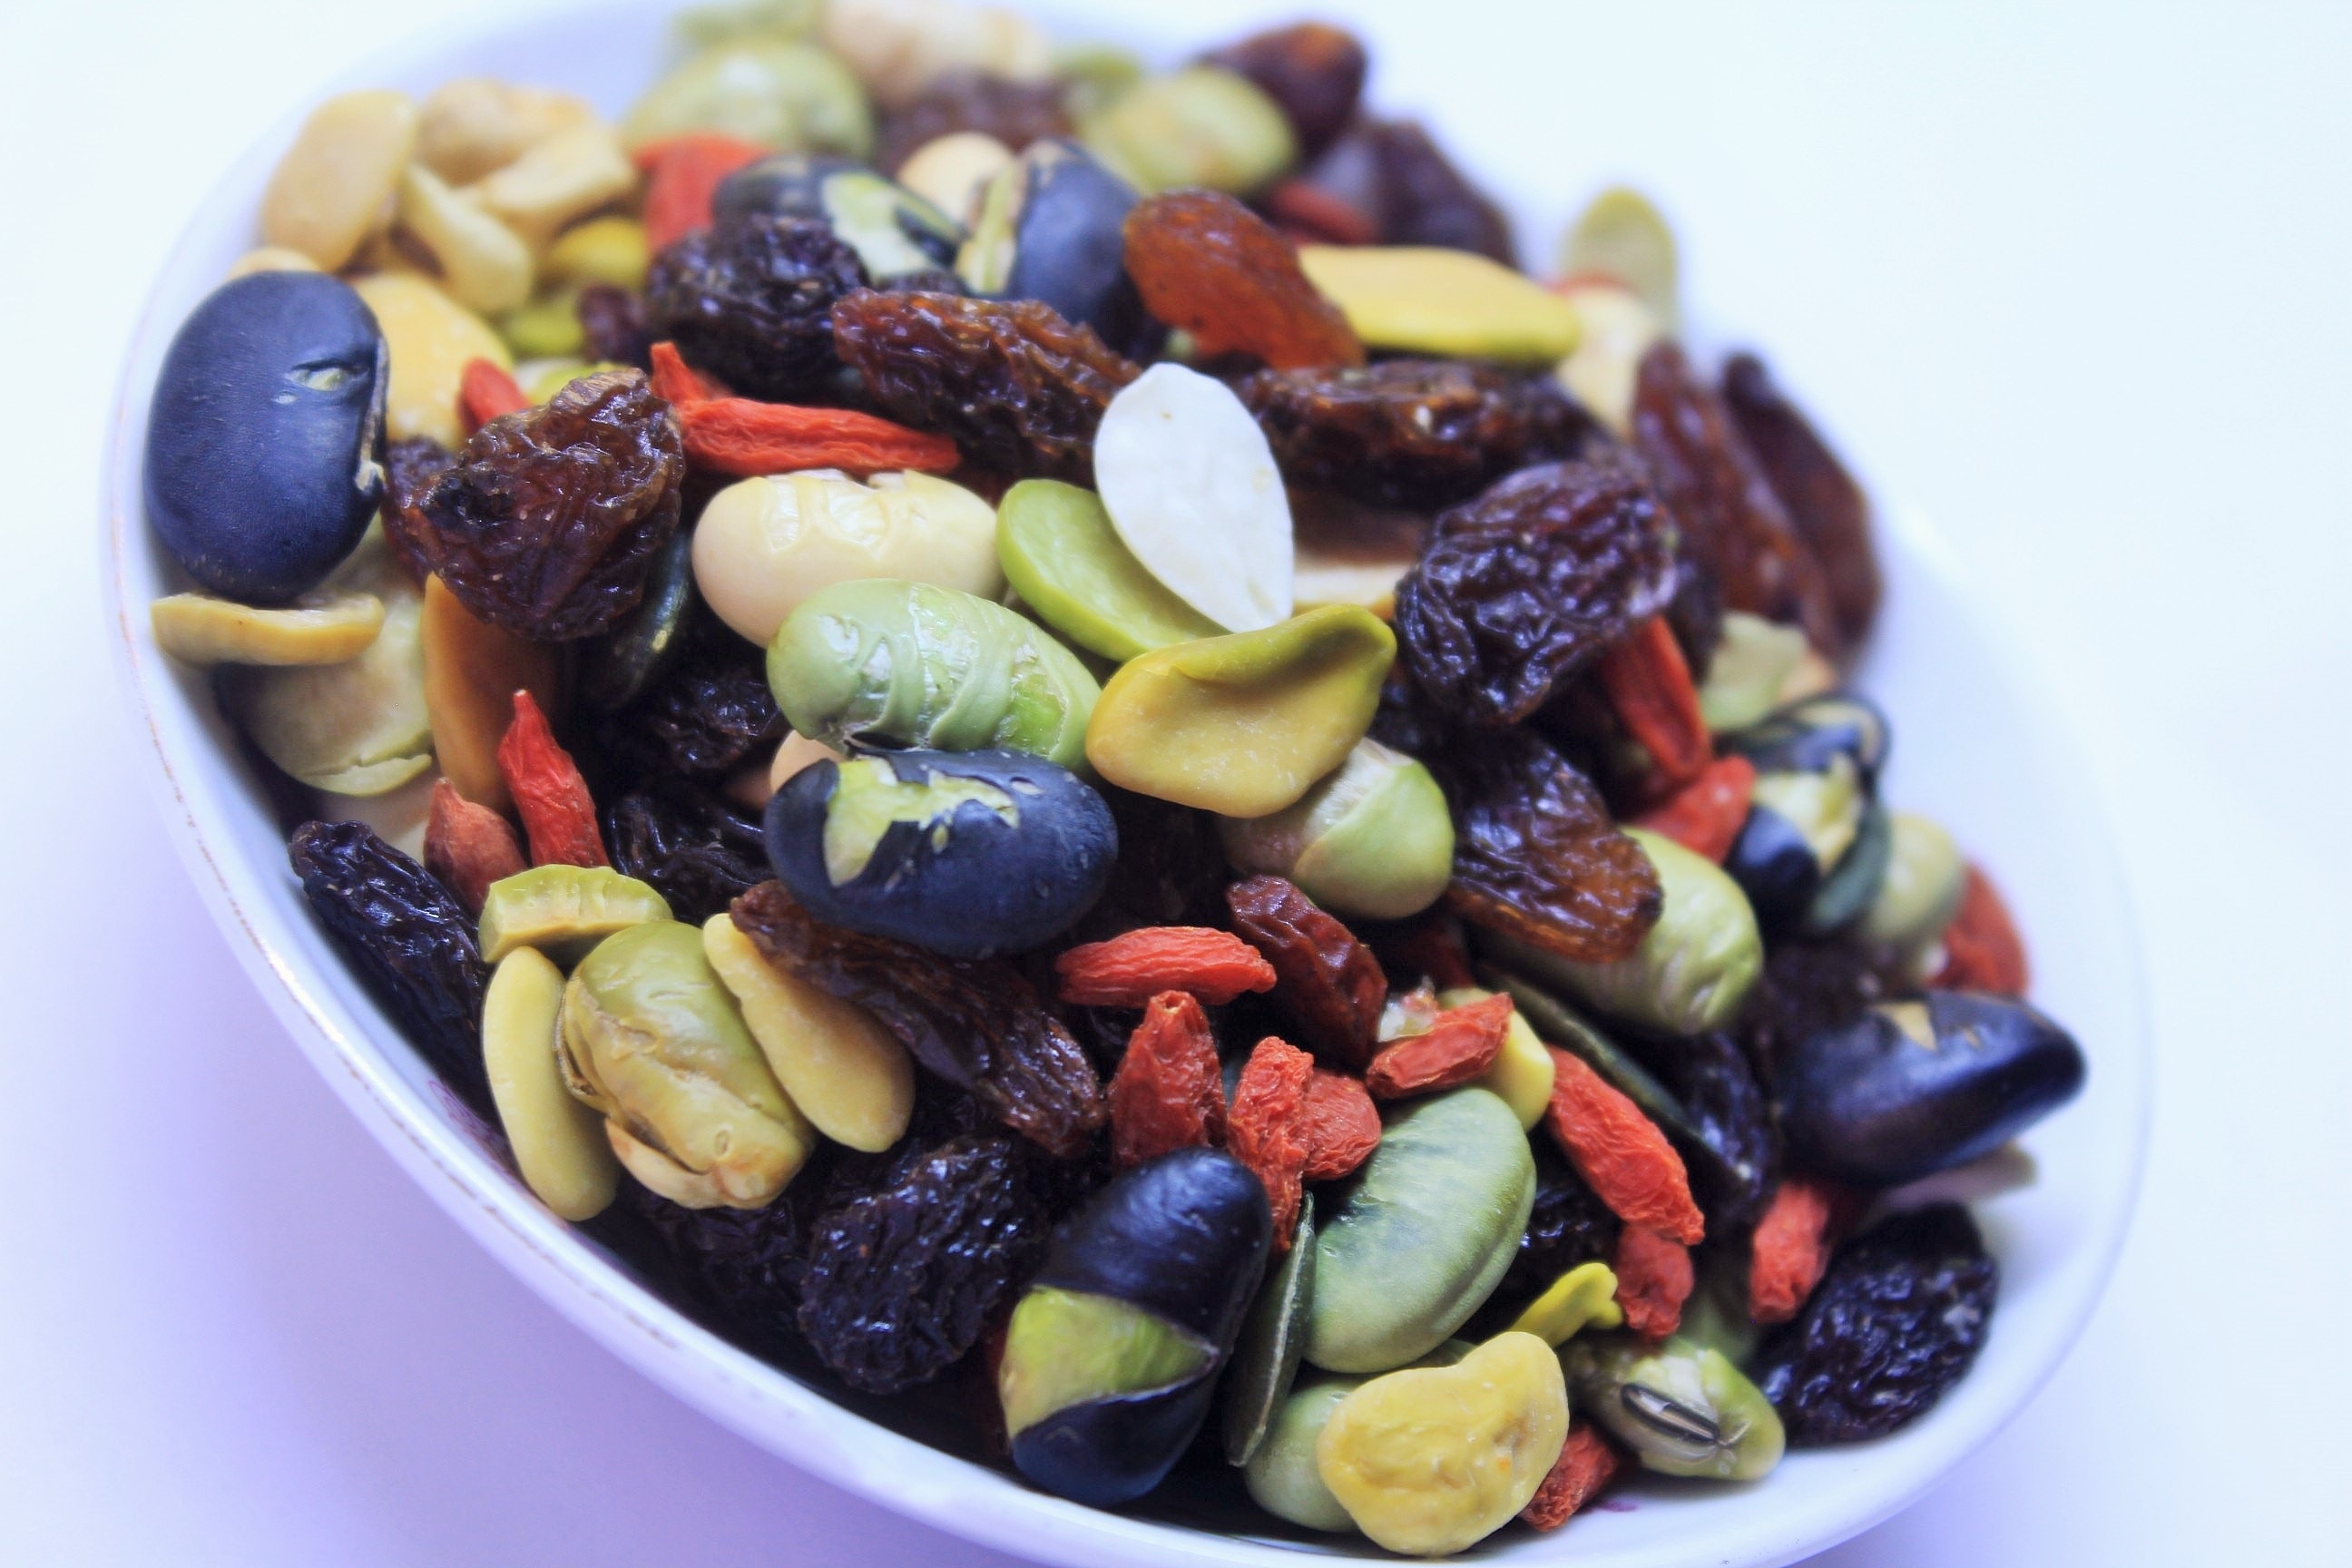 Healthy, Snack, Mixed Nuts, Food, Nuts, raisin, blueberry